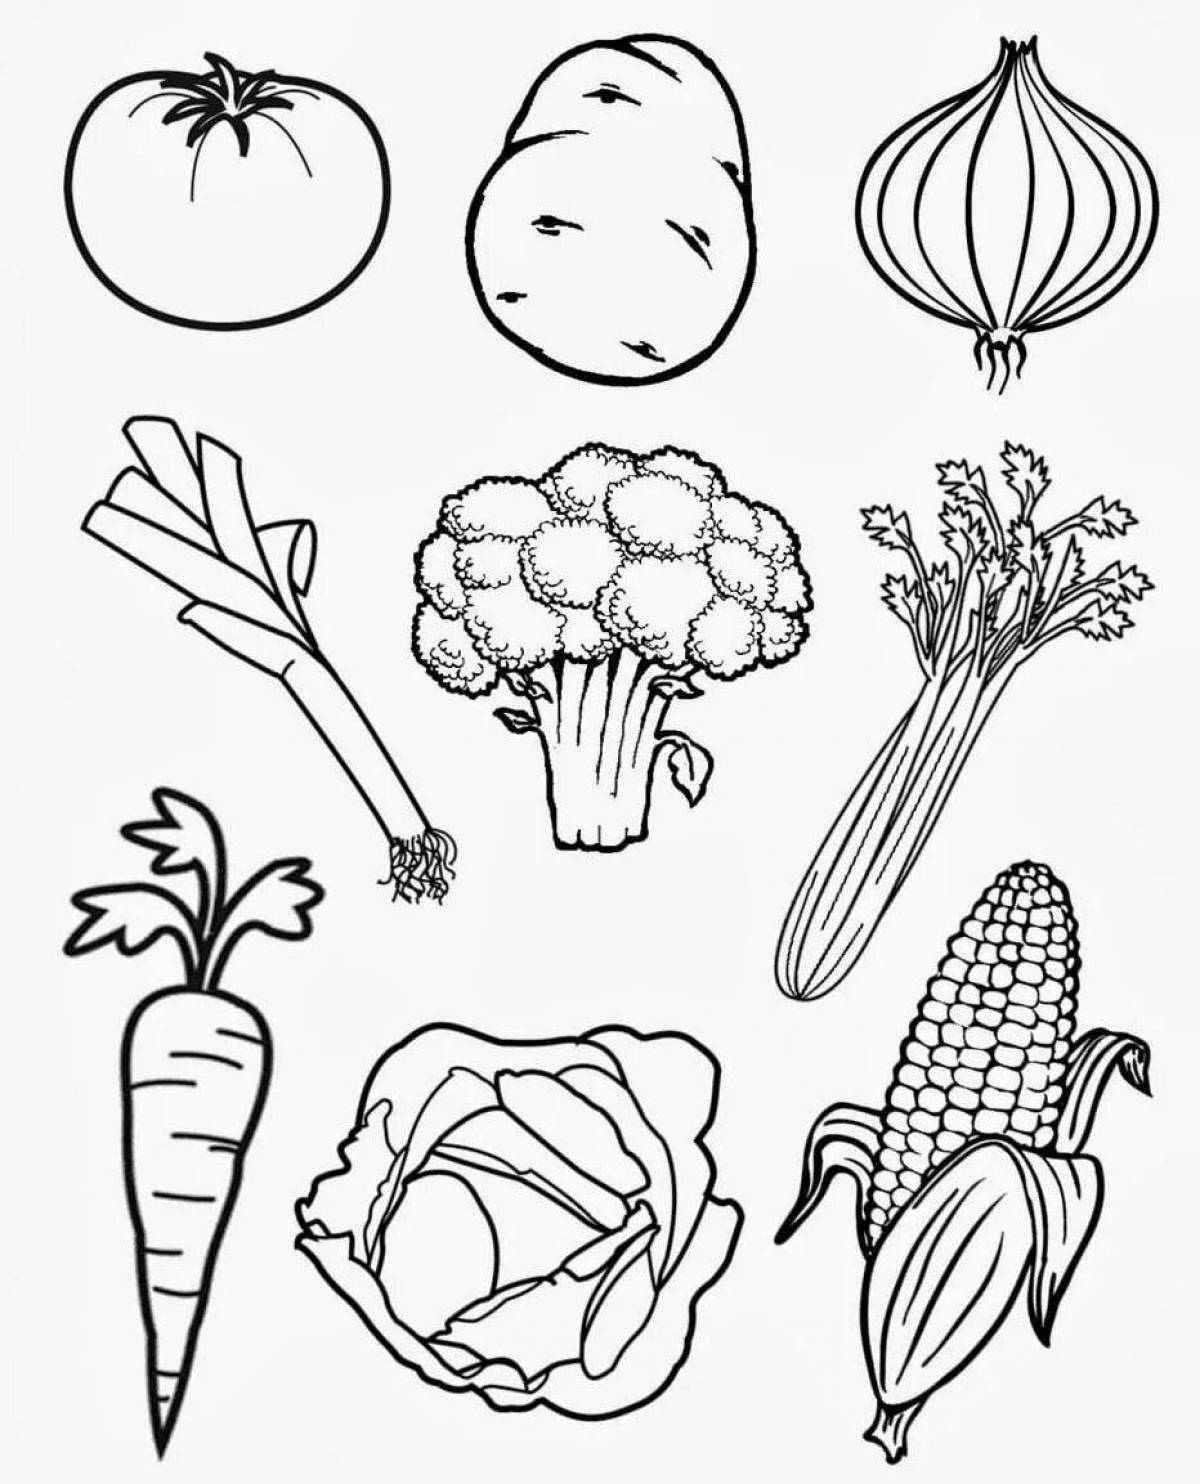 Exquisite fruits and vegetables coloring pages for kids